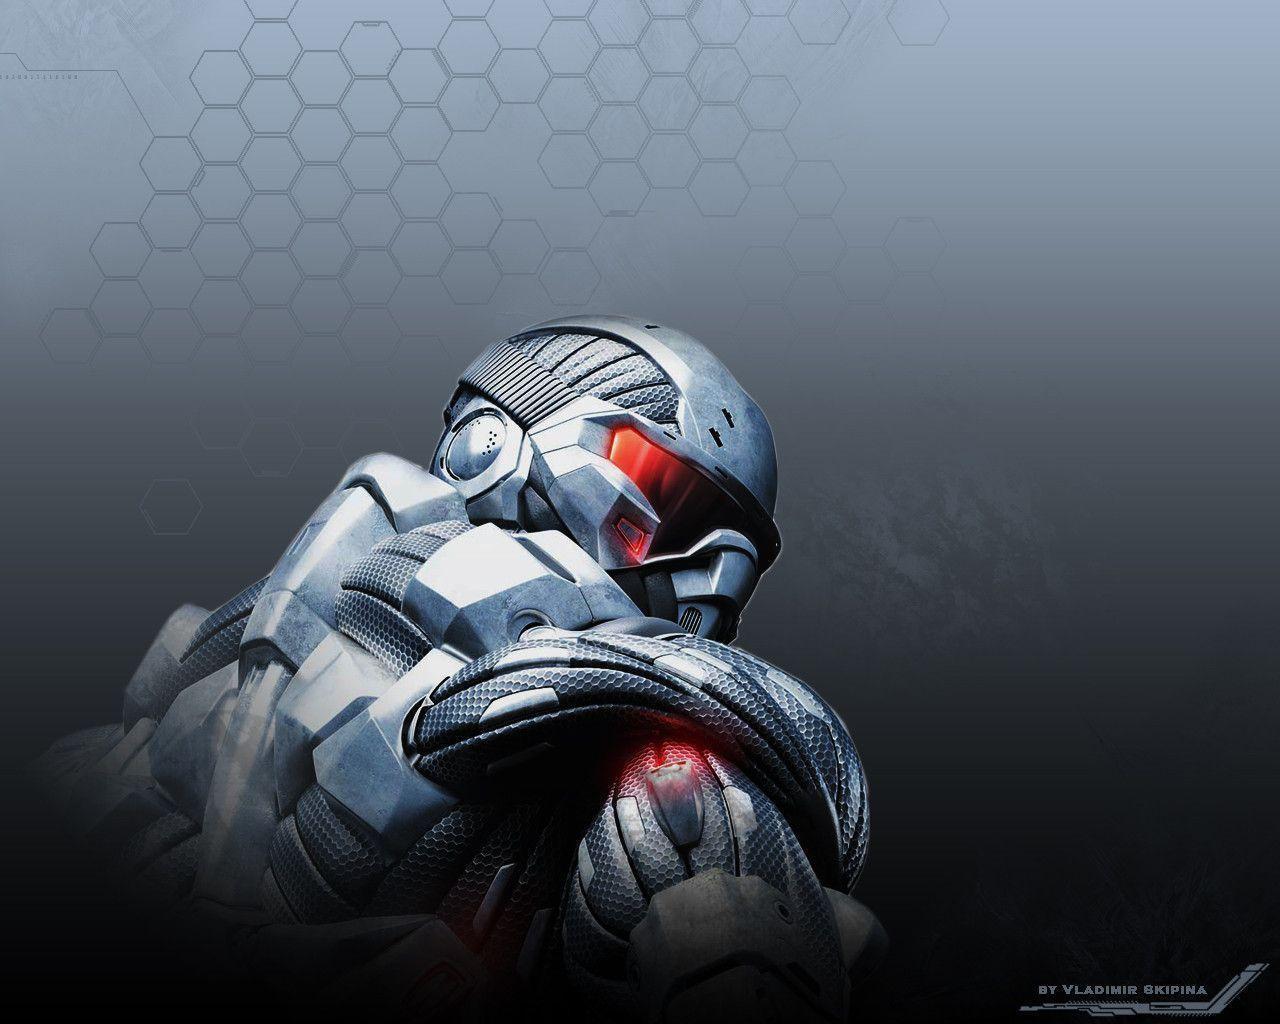 Wallpaper. Crysis 2 Strategy Guide